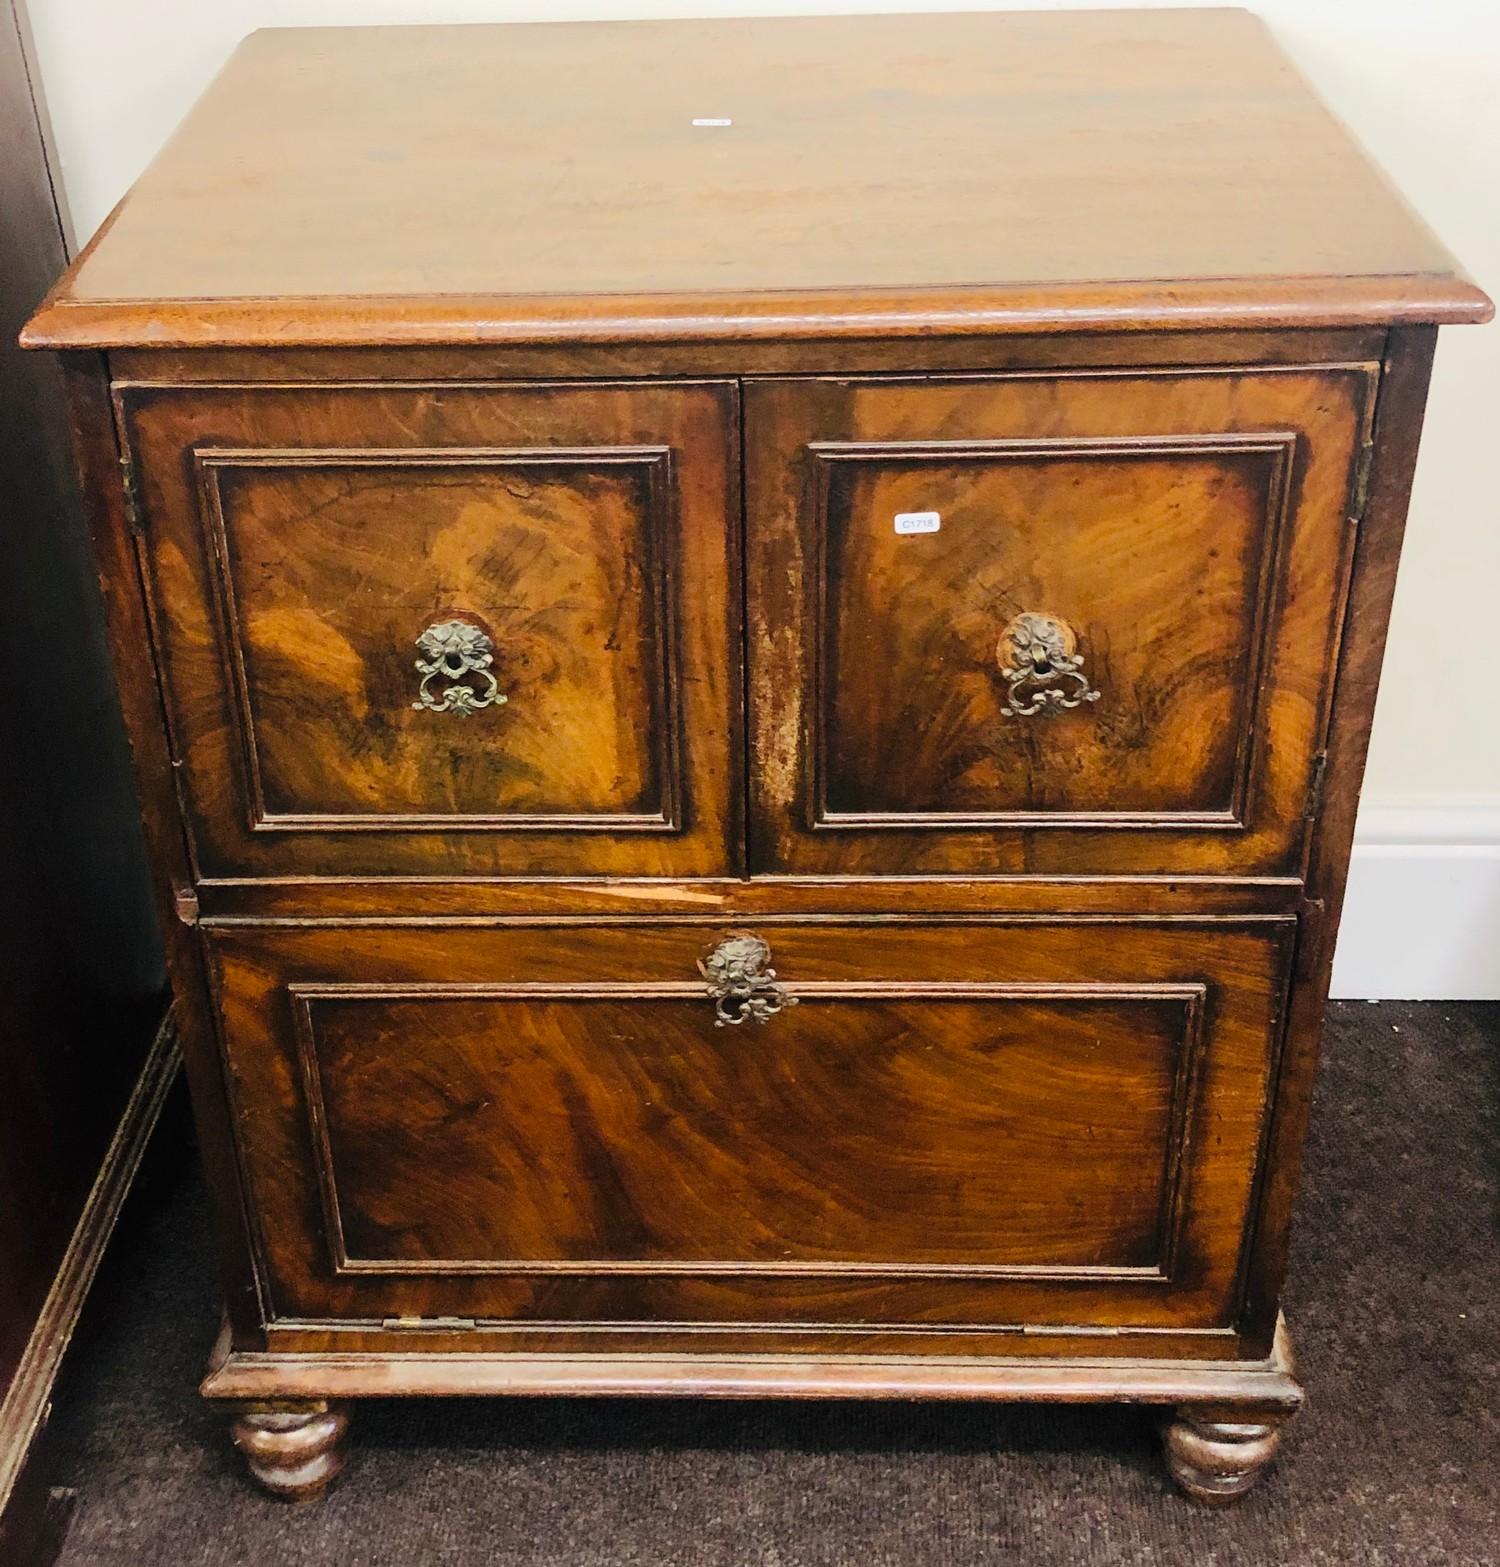 2 Door antique Georgian commode, overall good condition, age related wear, approximate measurements: